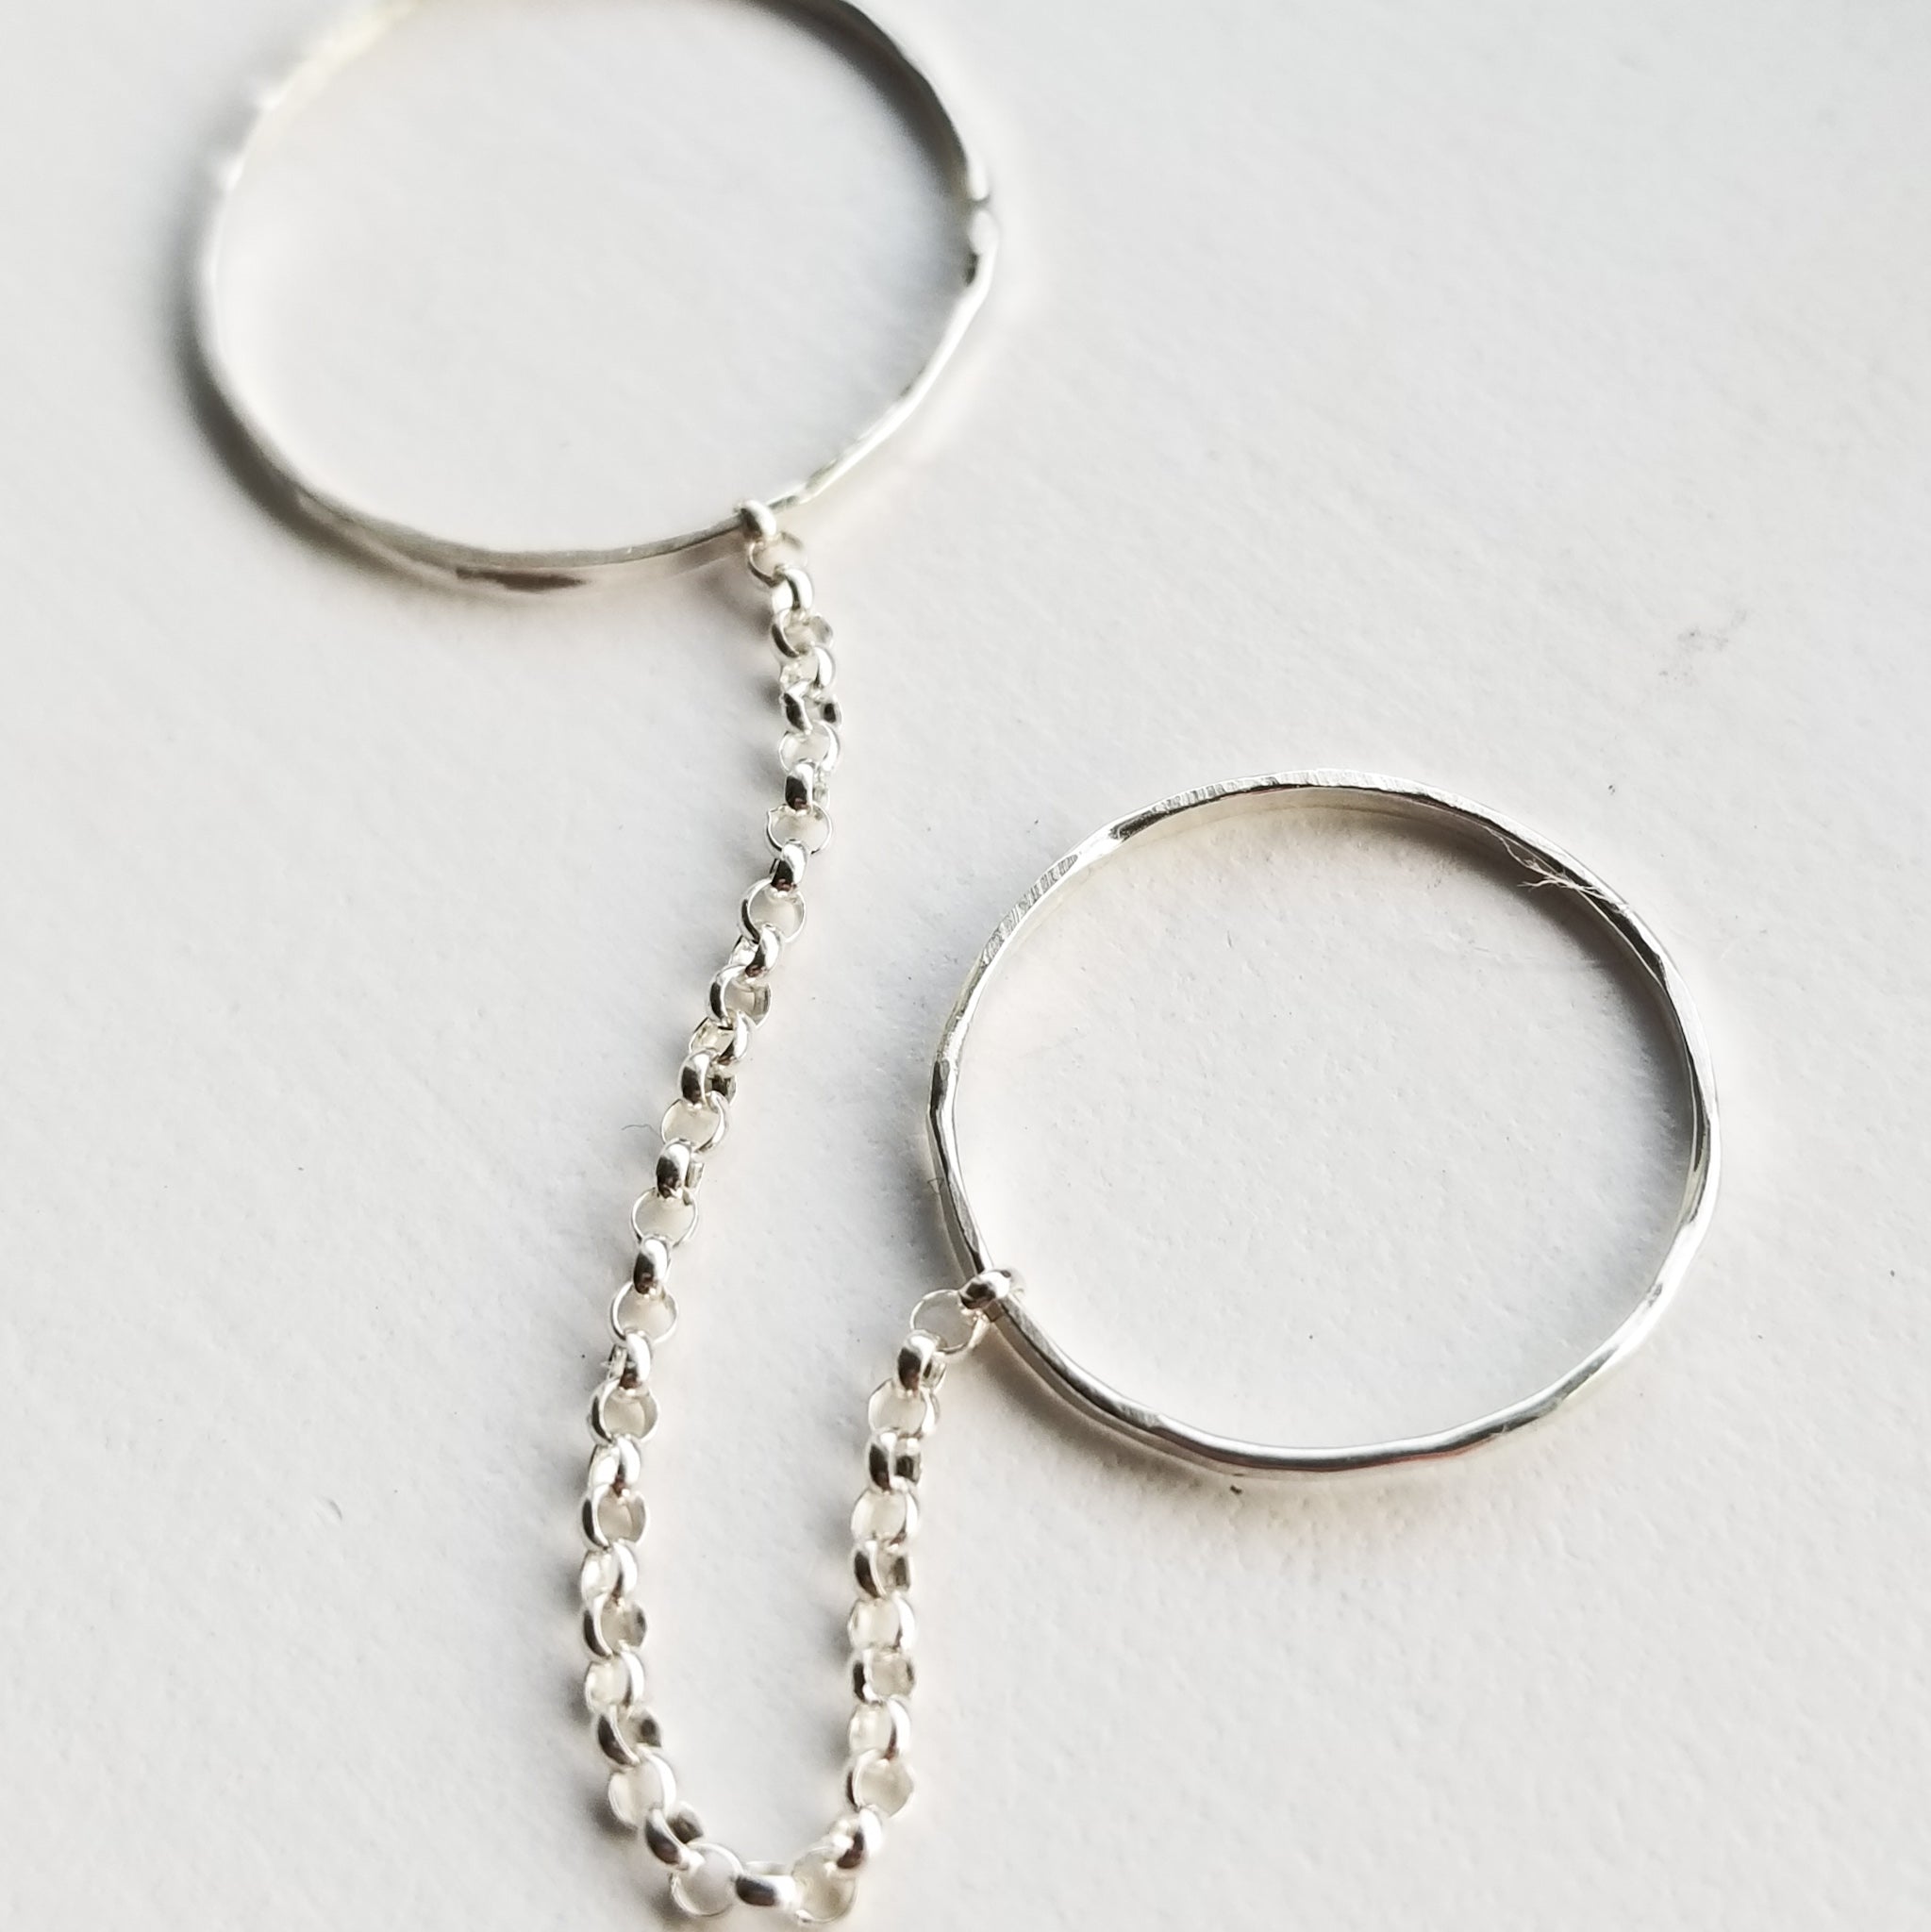 a set of two silver band rings connected by a silver chain on a white background